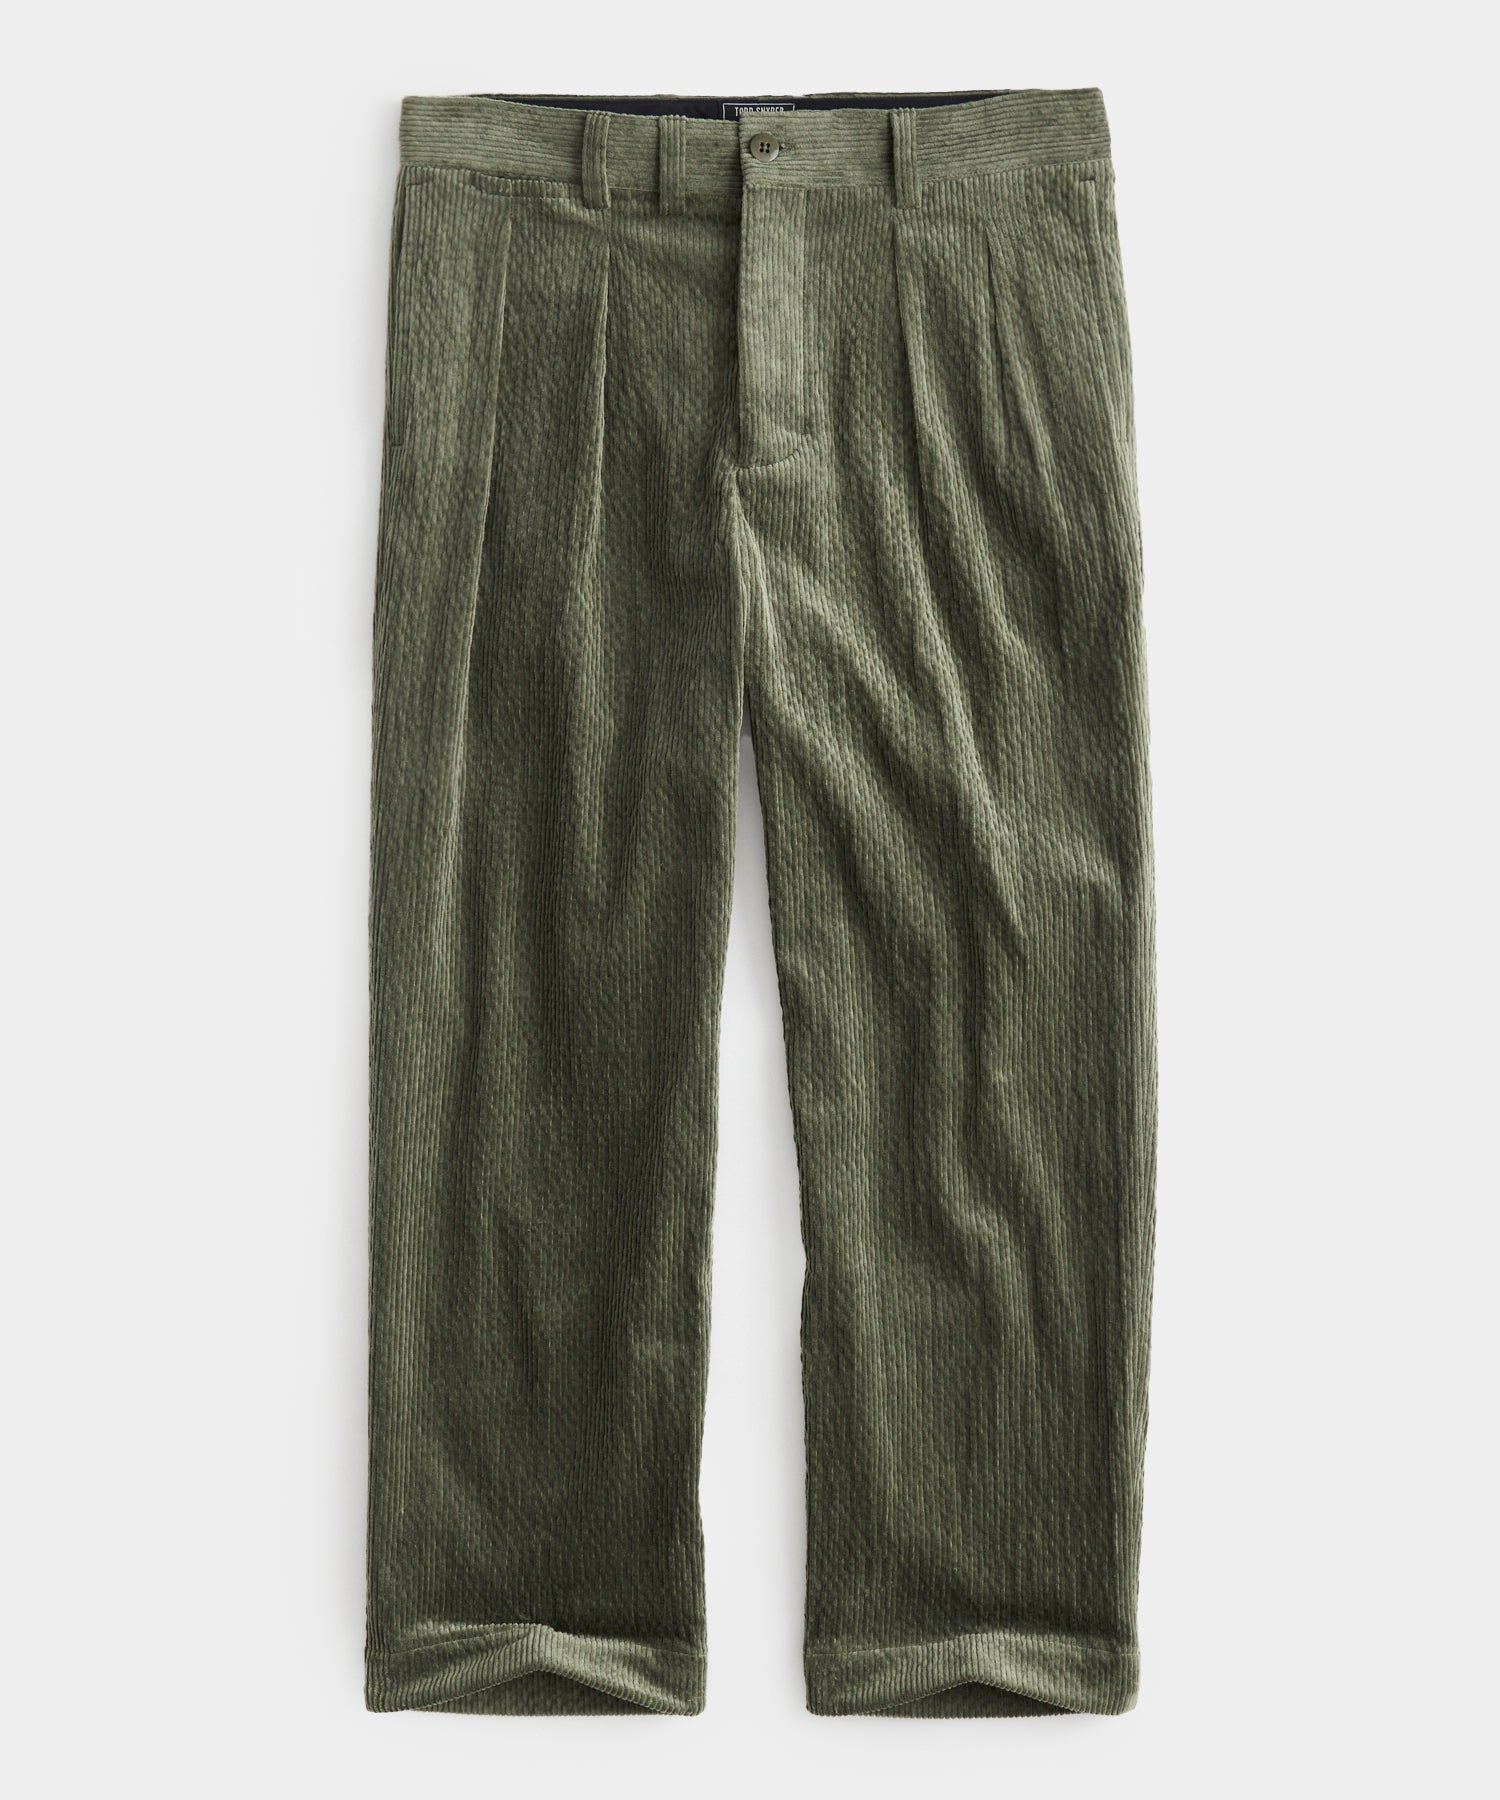 Italian Wide Wale Corduroy Officer Chino in Fatigue